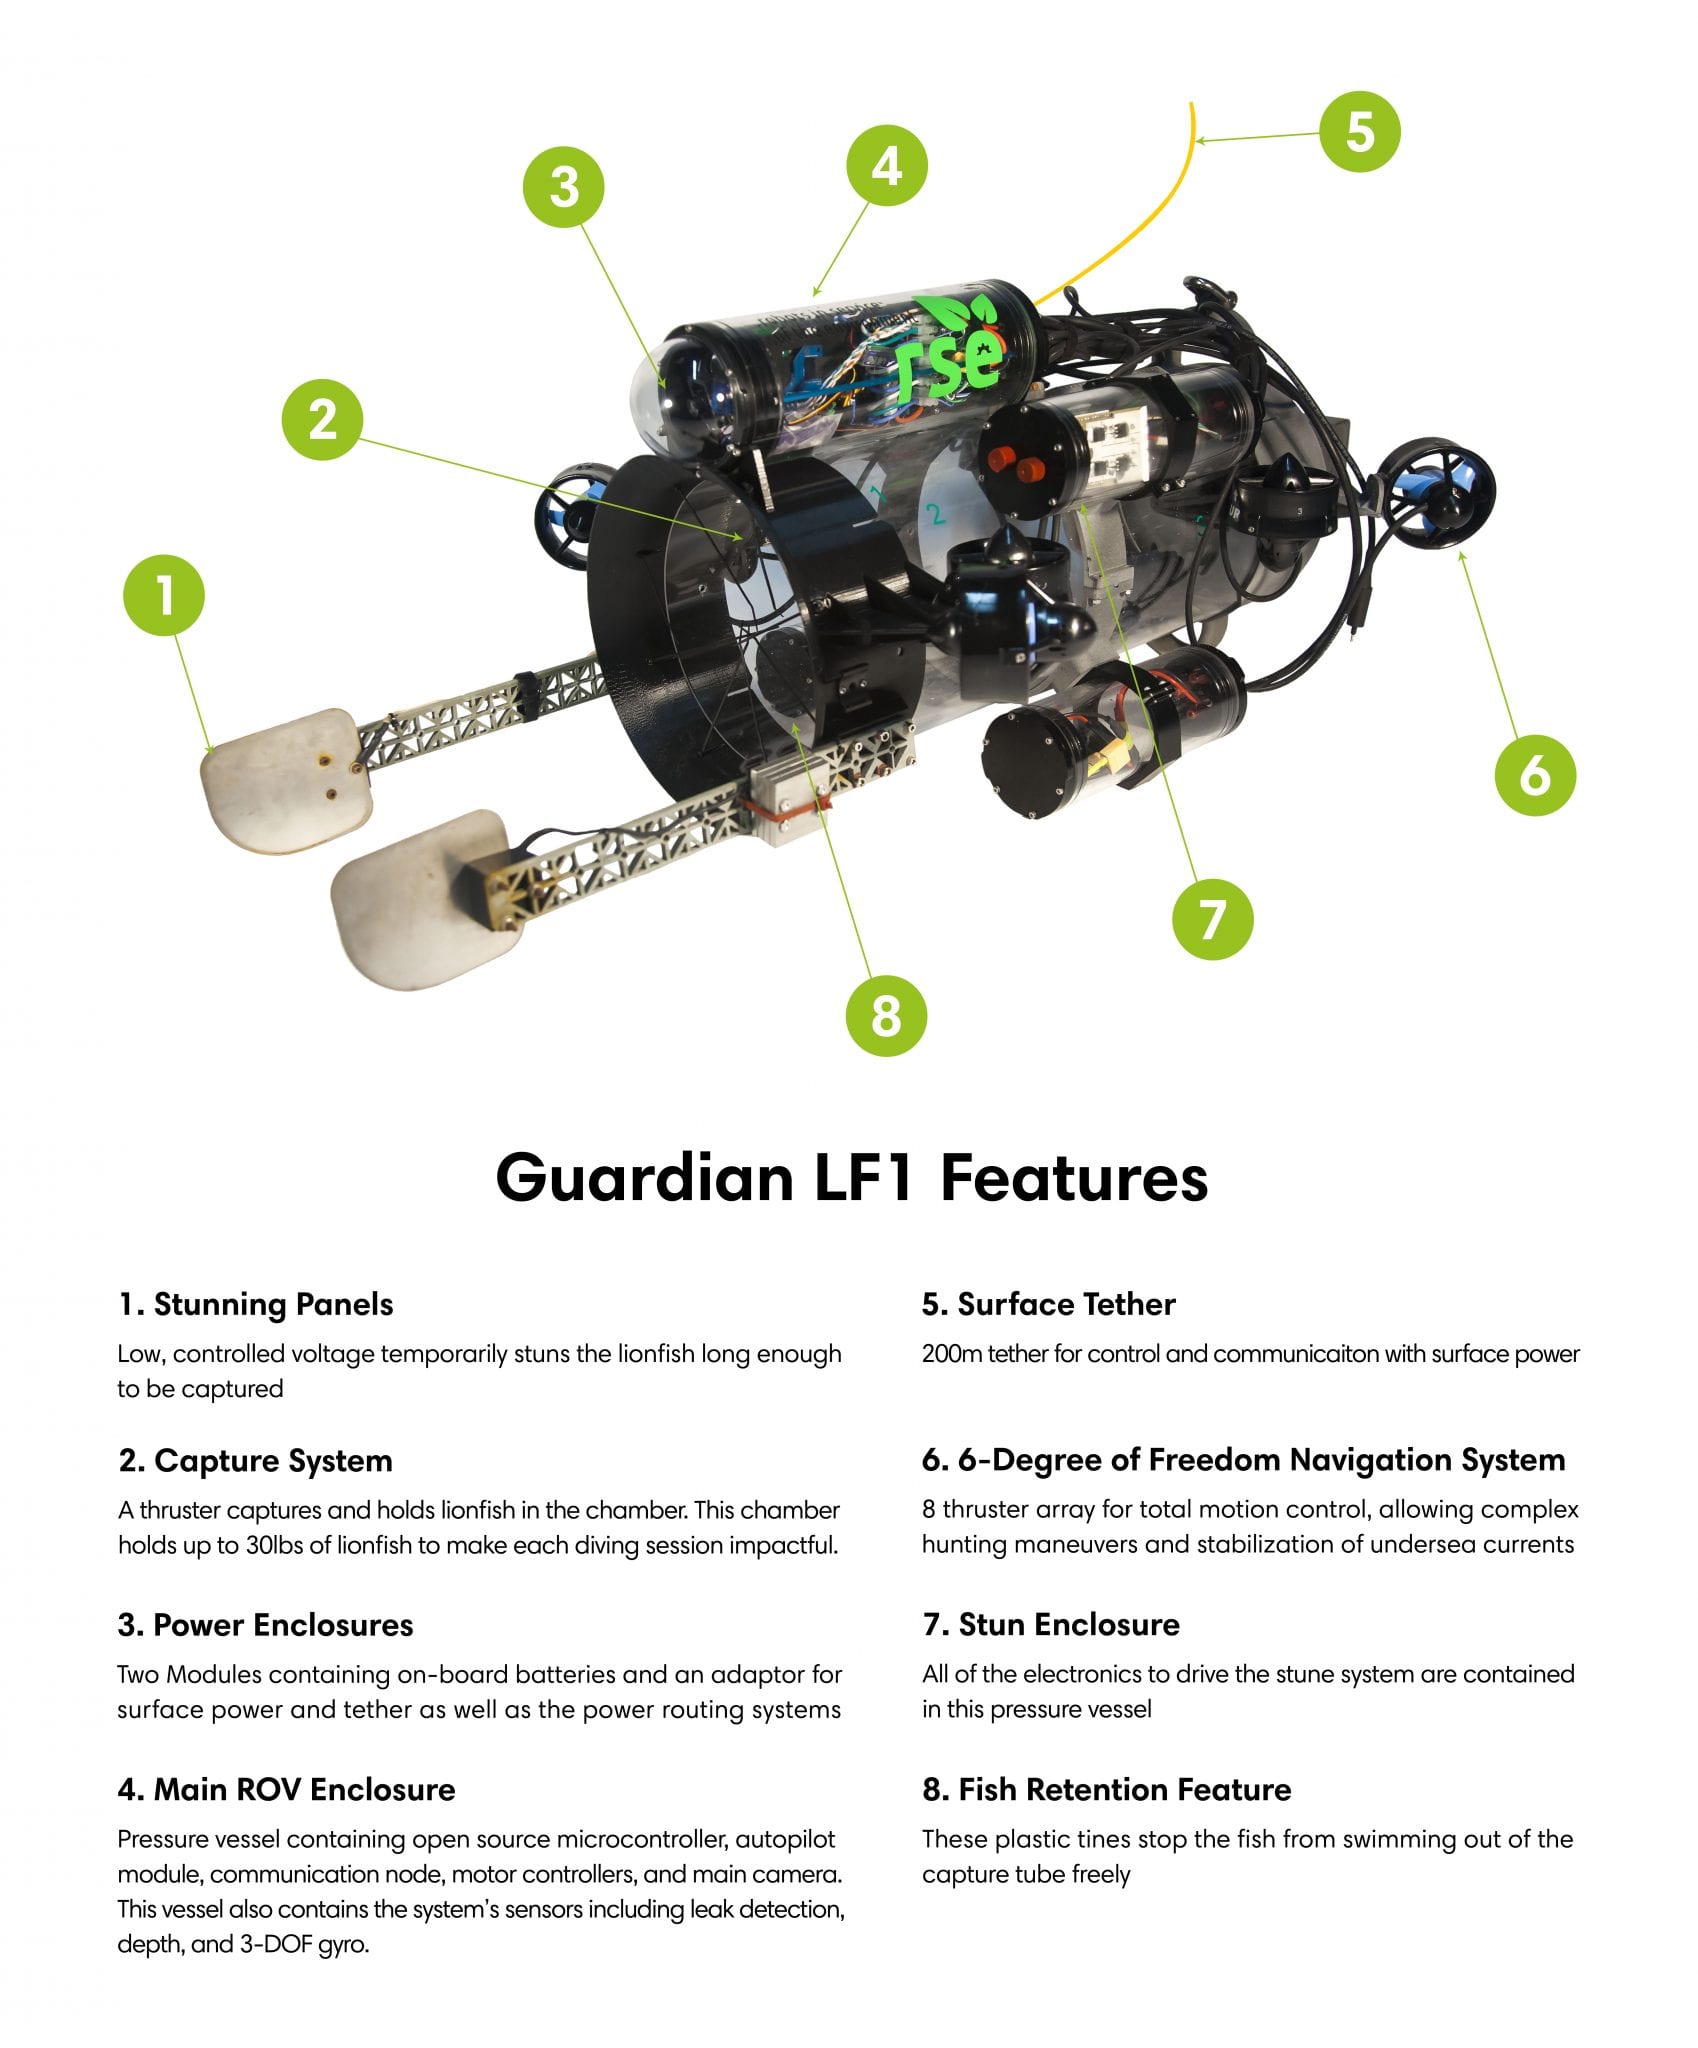 Guardian-LF1-Features